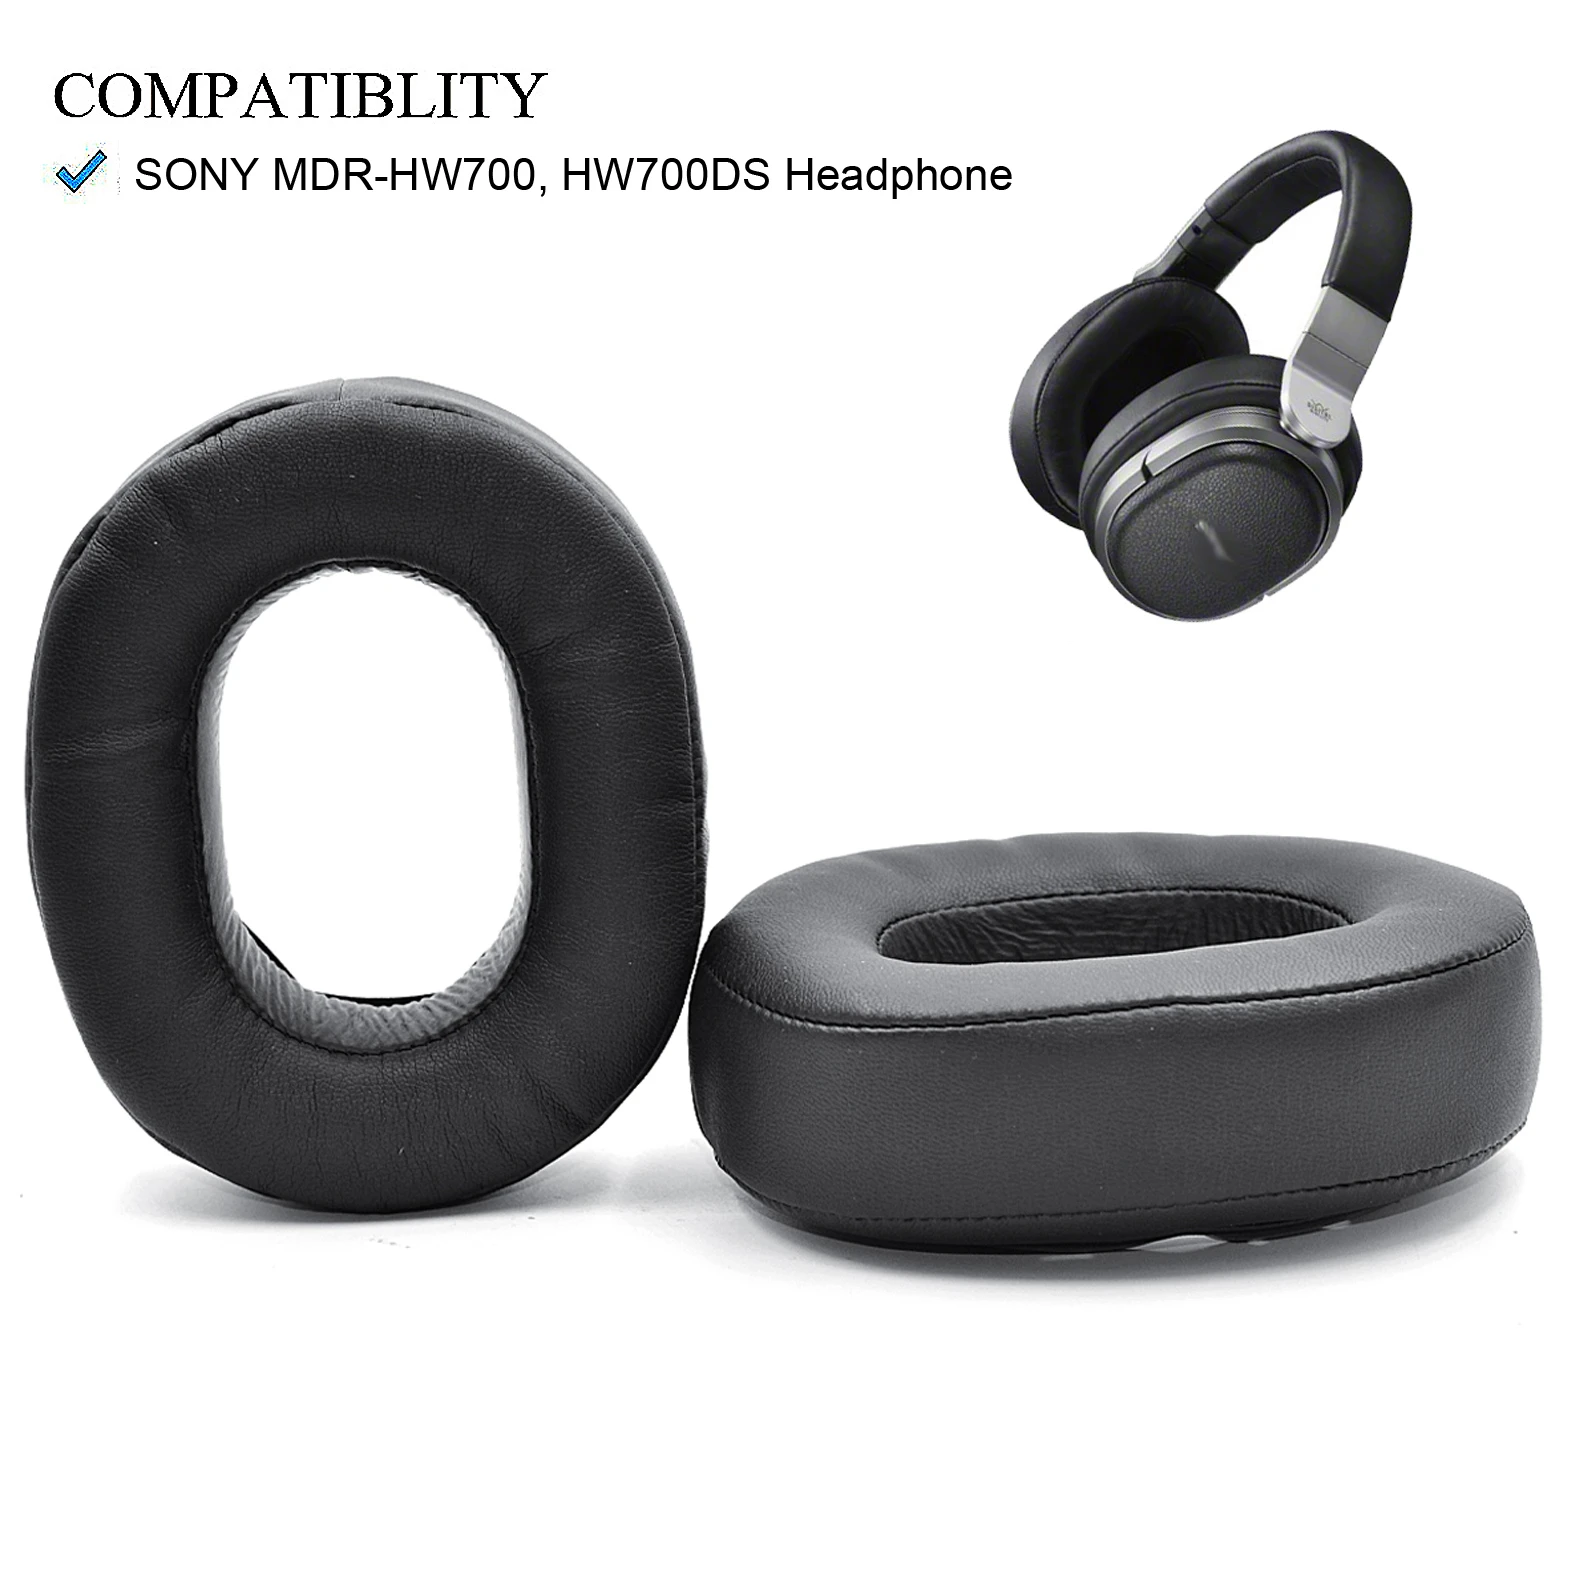 BGWORLD Replacement MDR-HW700 HW700DS Ear pads Cushion for Sony MDR-HW700  MDR-HW700DS Wireless Headphones